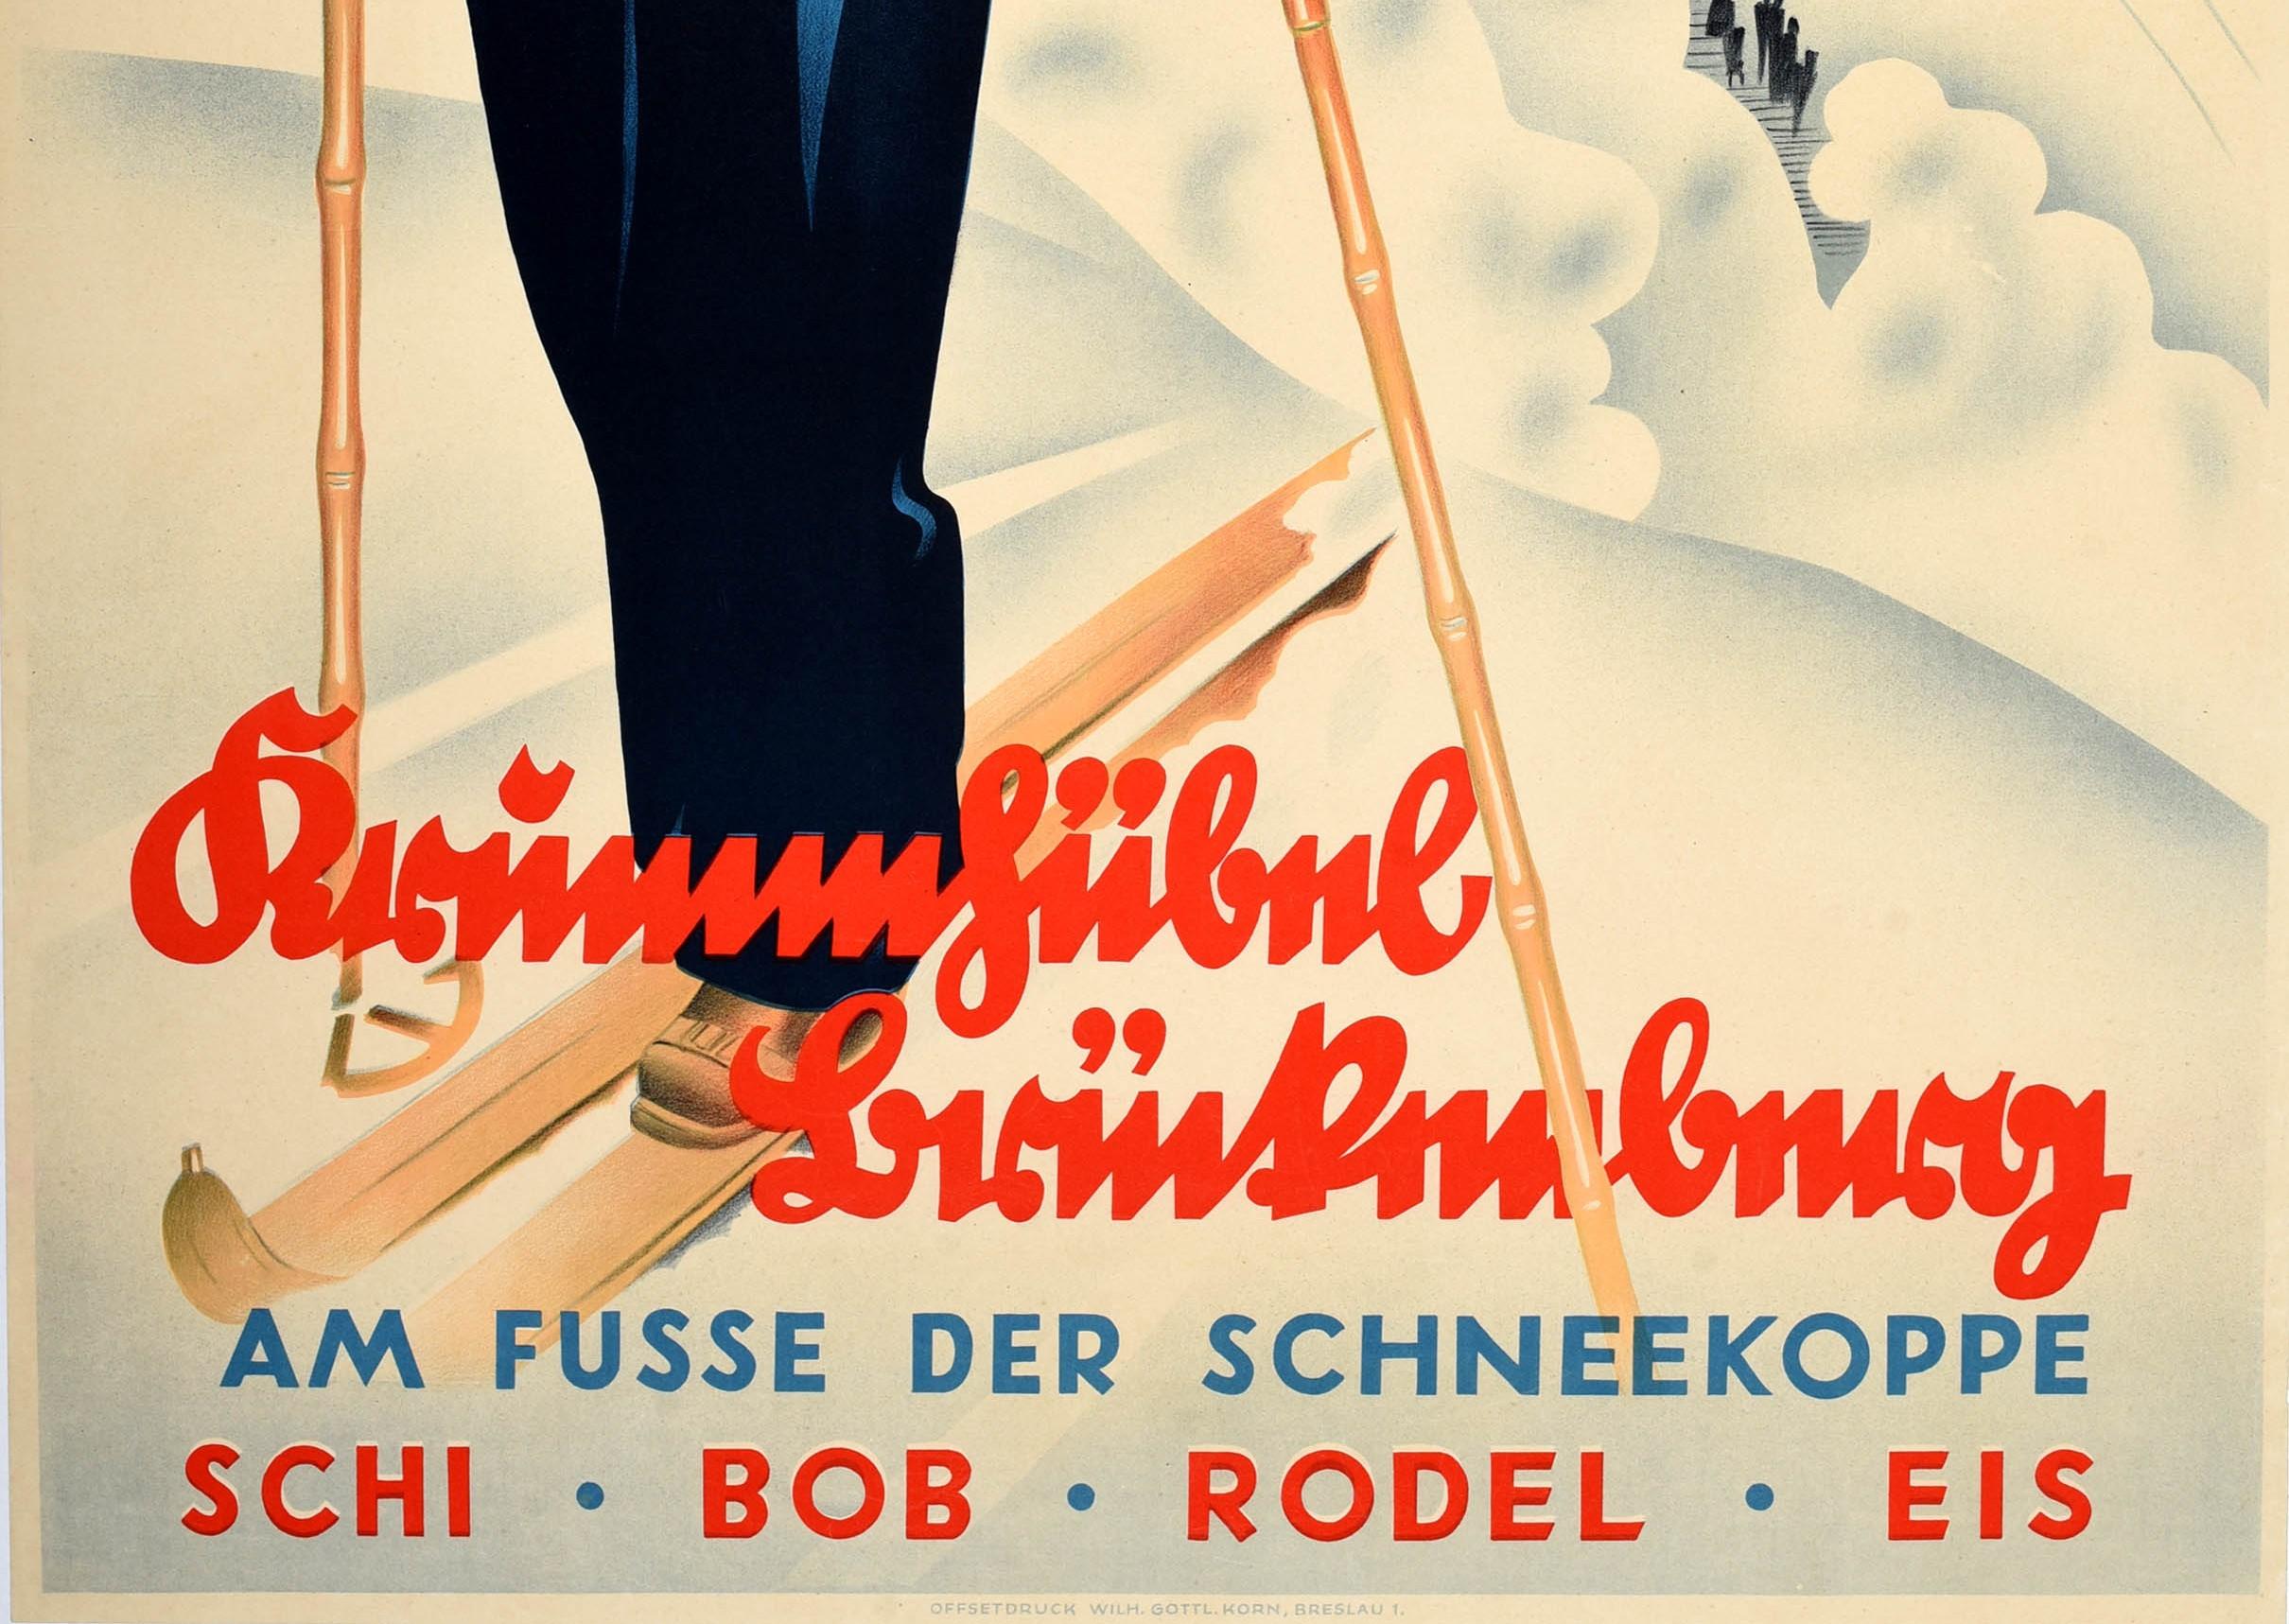 Original vintage ski and winter sport travel poster for the Krummhubel Mountain Resort at the foot of the Schneekoppe Ski Bobsled Toboggan Ice / Krummhubel Bruckenberg am Fusse der Schneekoppe Schi Bob Rodel Eis. The Schneekoppe / Riesenkoppe is the